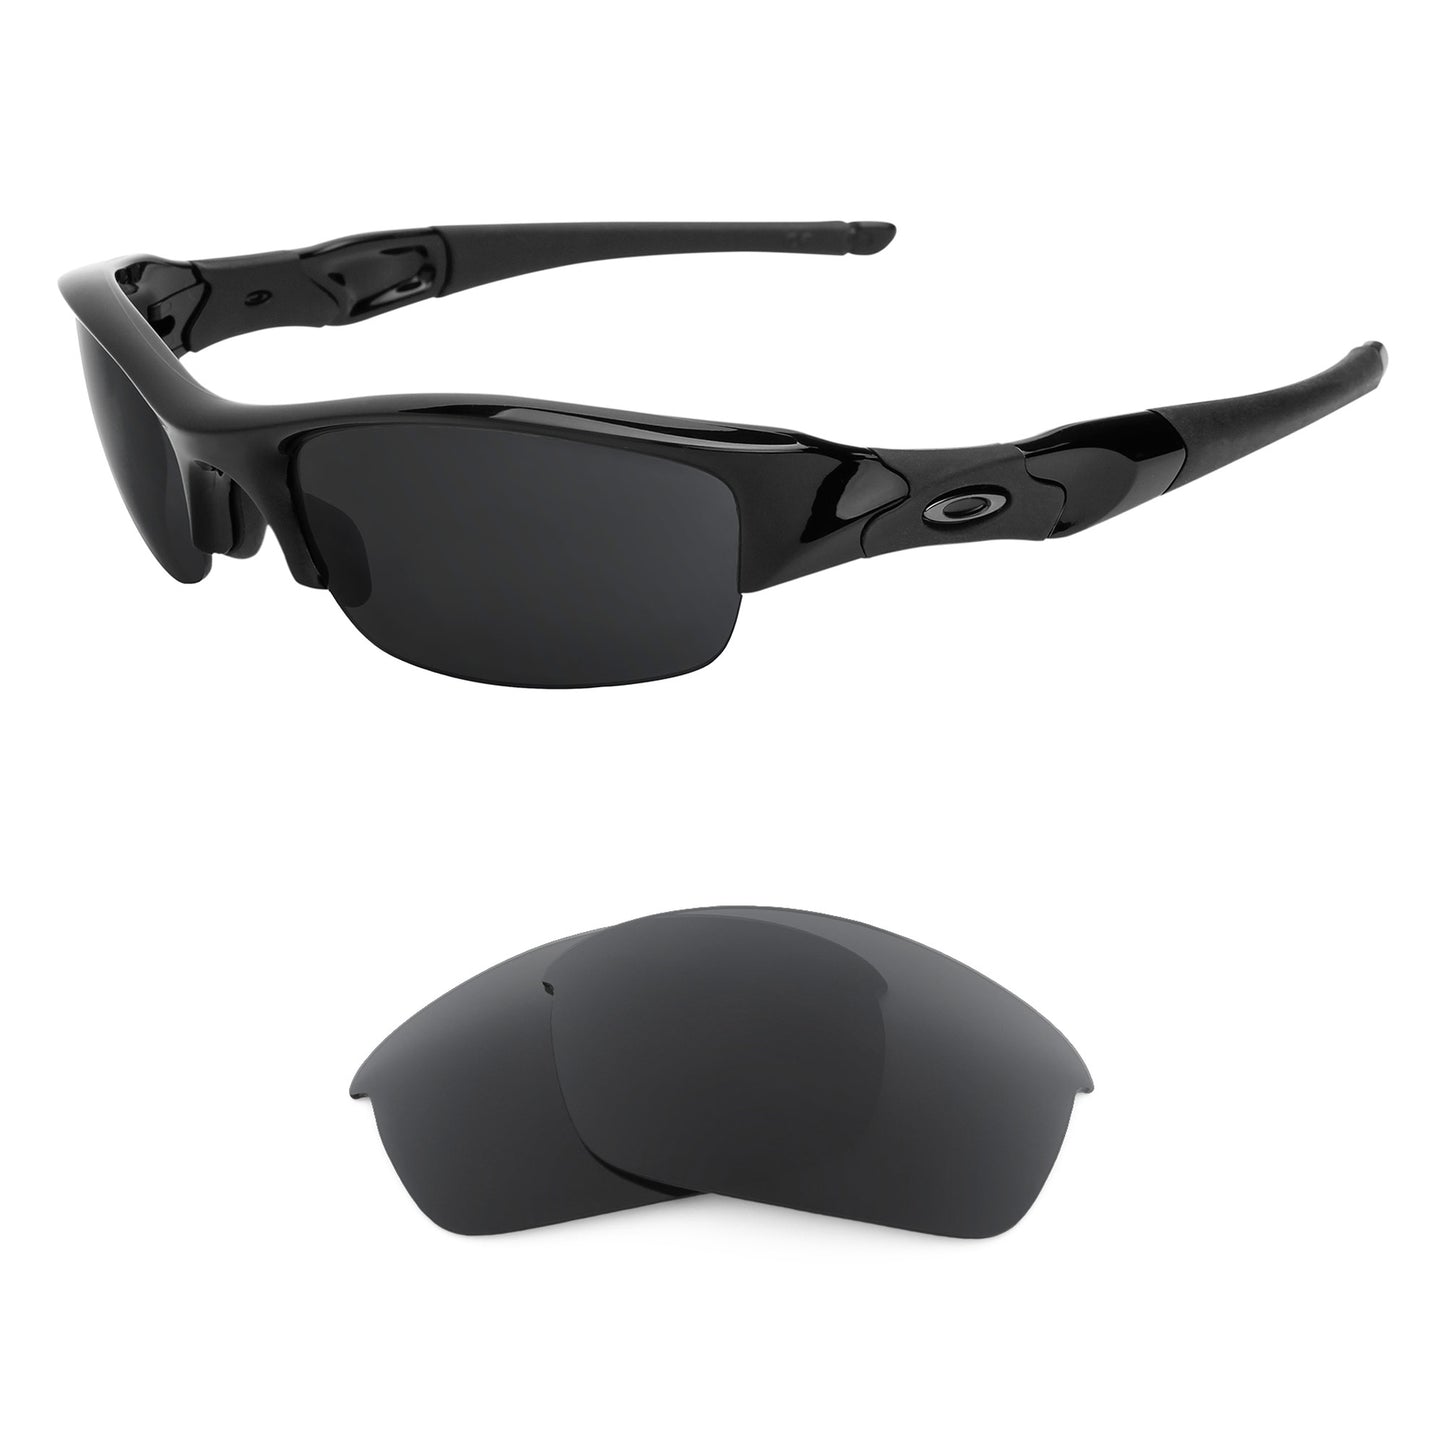 Oakley Flak Jacket sunglasses with replacement lenses